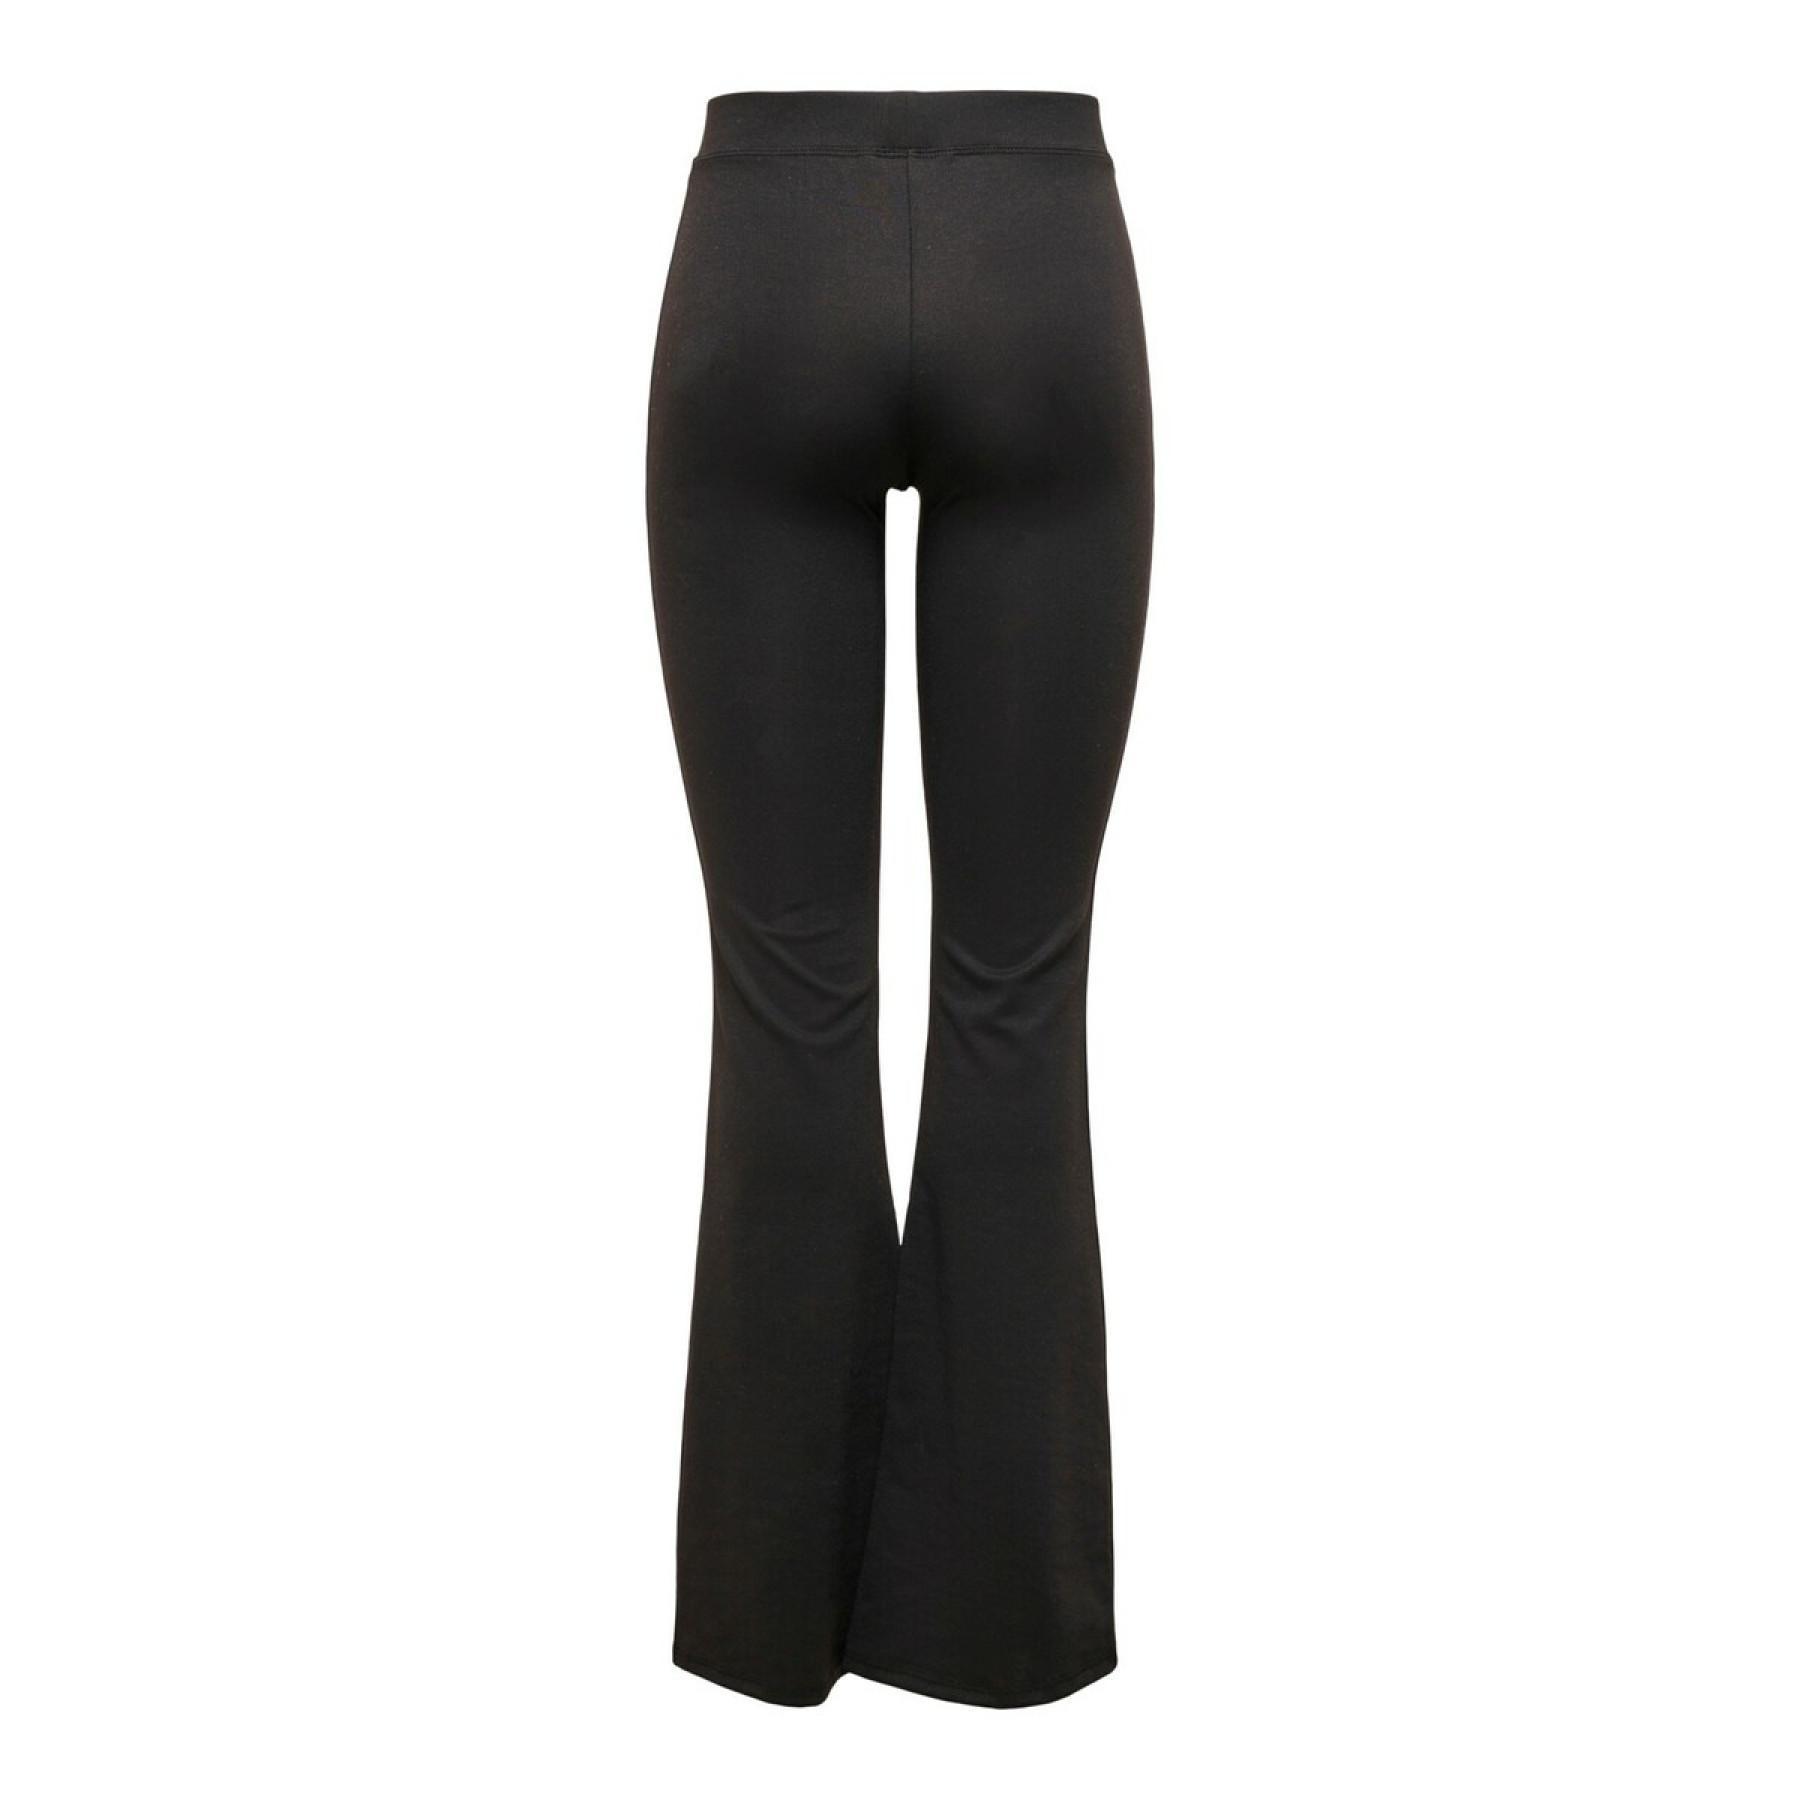 Trousers woman Only Fever stretch flaired